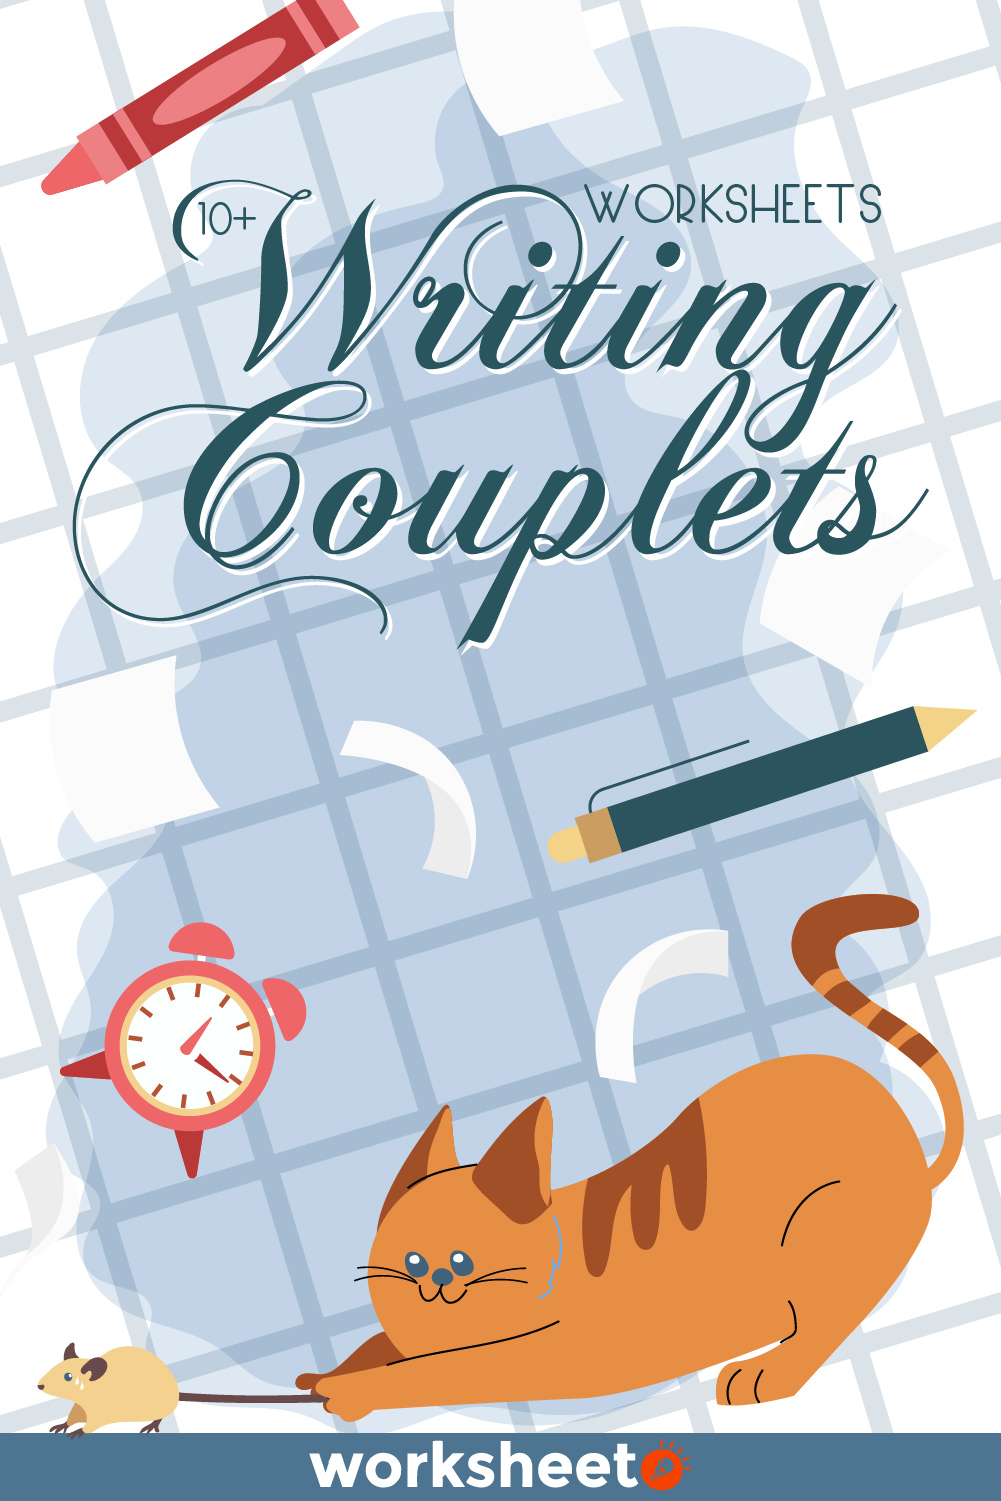 Worksheets Writing Couplets